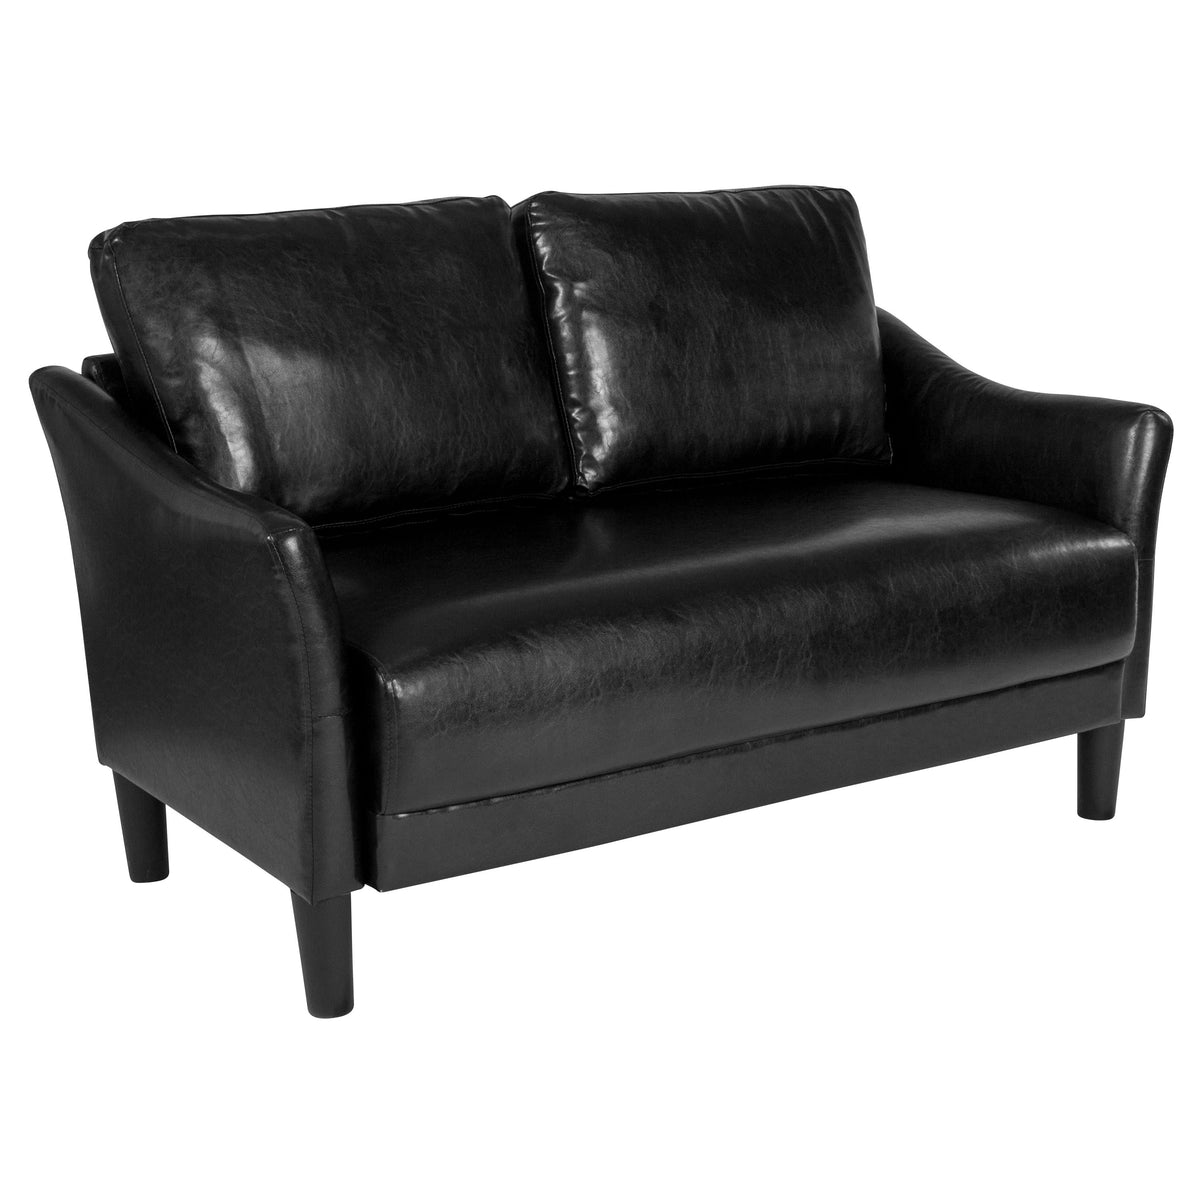 Black LeatherSoft |#| Upholstered Living Room Loveseat with Single Cushion Seat in Black LeatherSoft